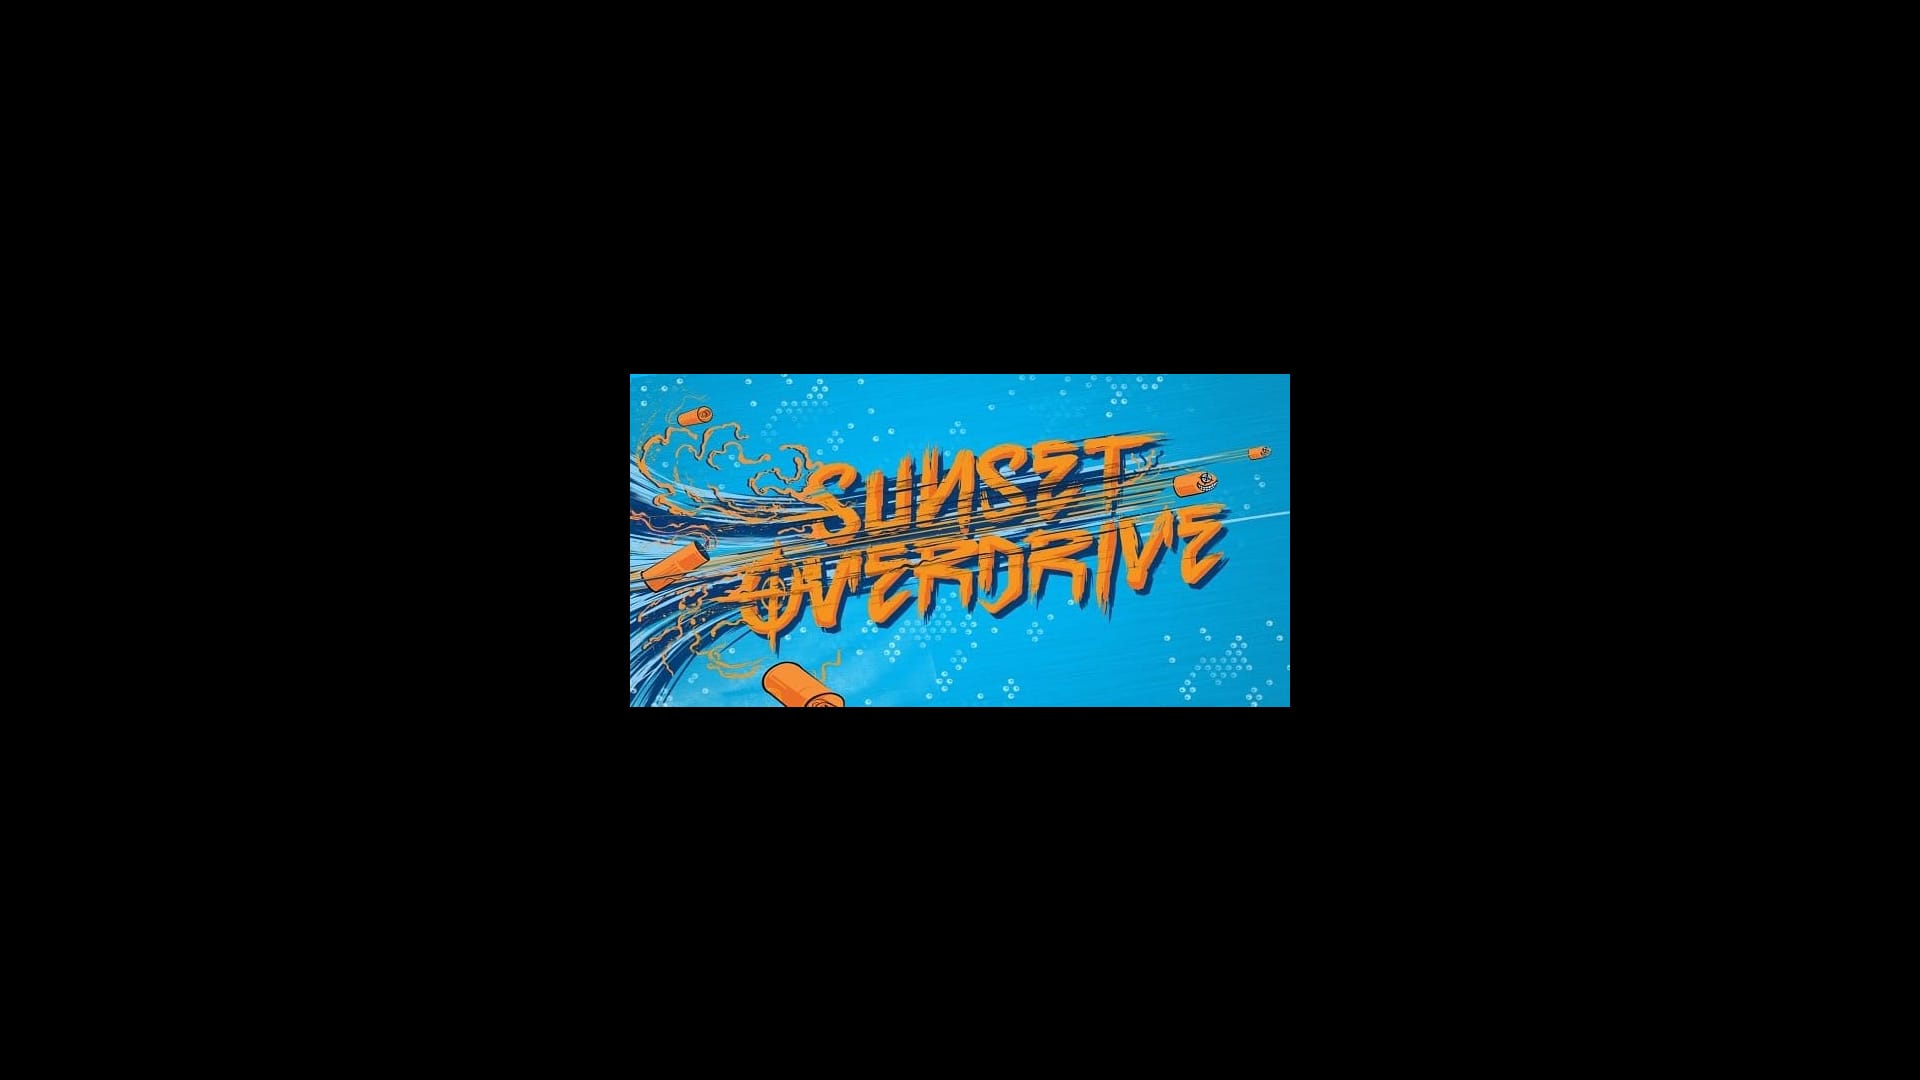 GAME PLAYERS 23: SUNSET OVERDRIVE  Sunset overdrive, Xbox one games, Sunset  city